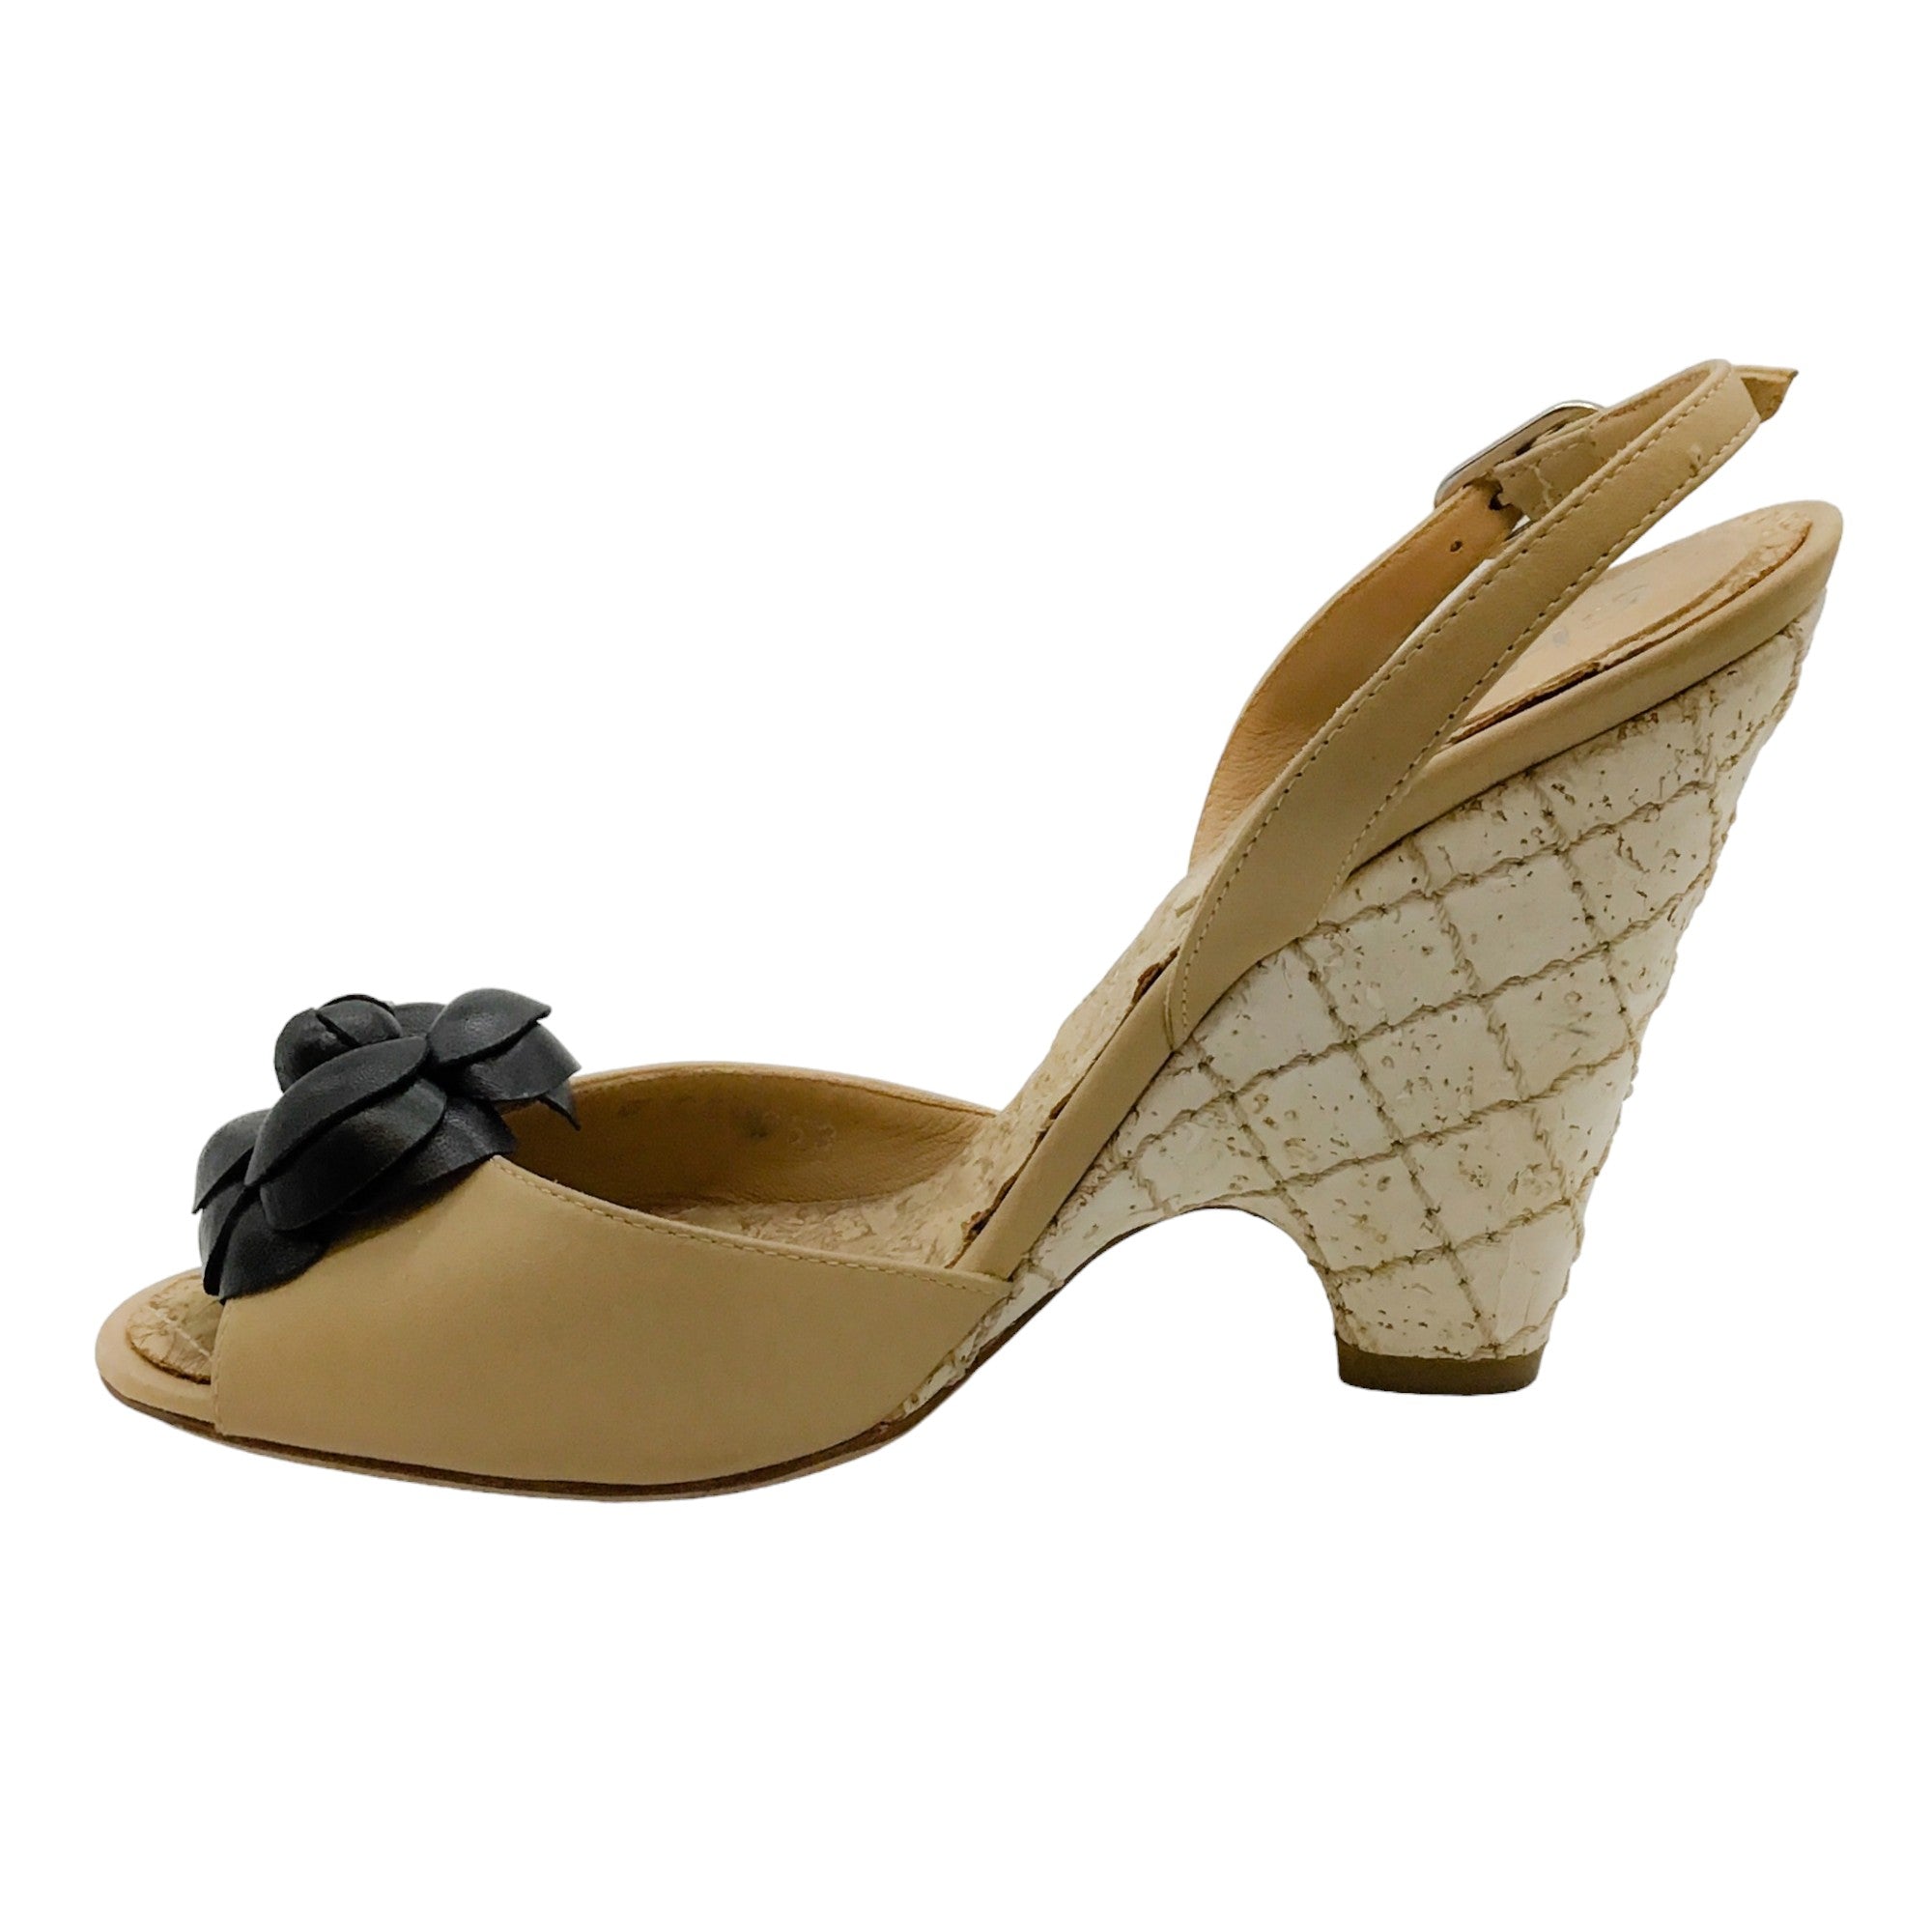 Chanel Beige Peep Toe Wedges With Black Camellia